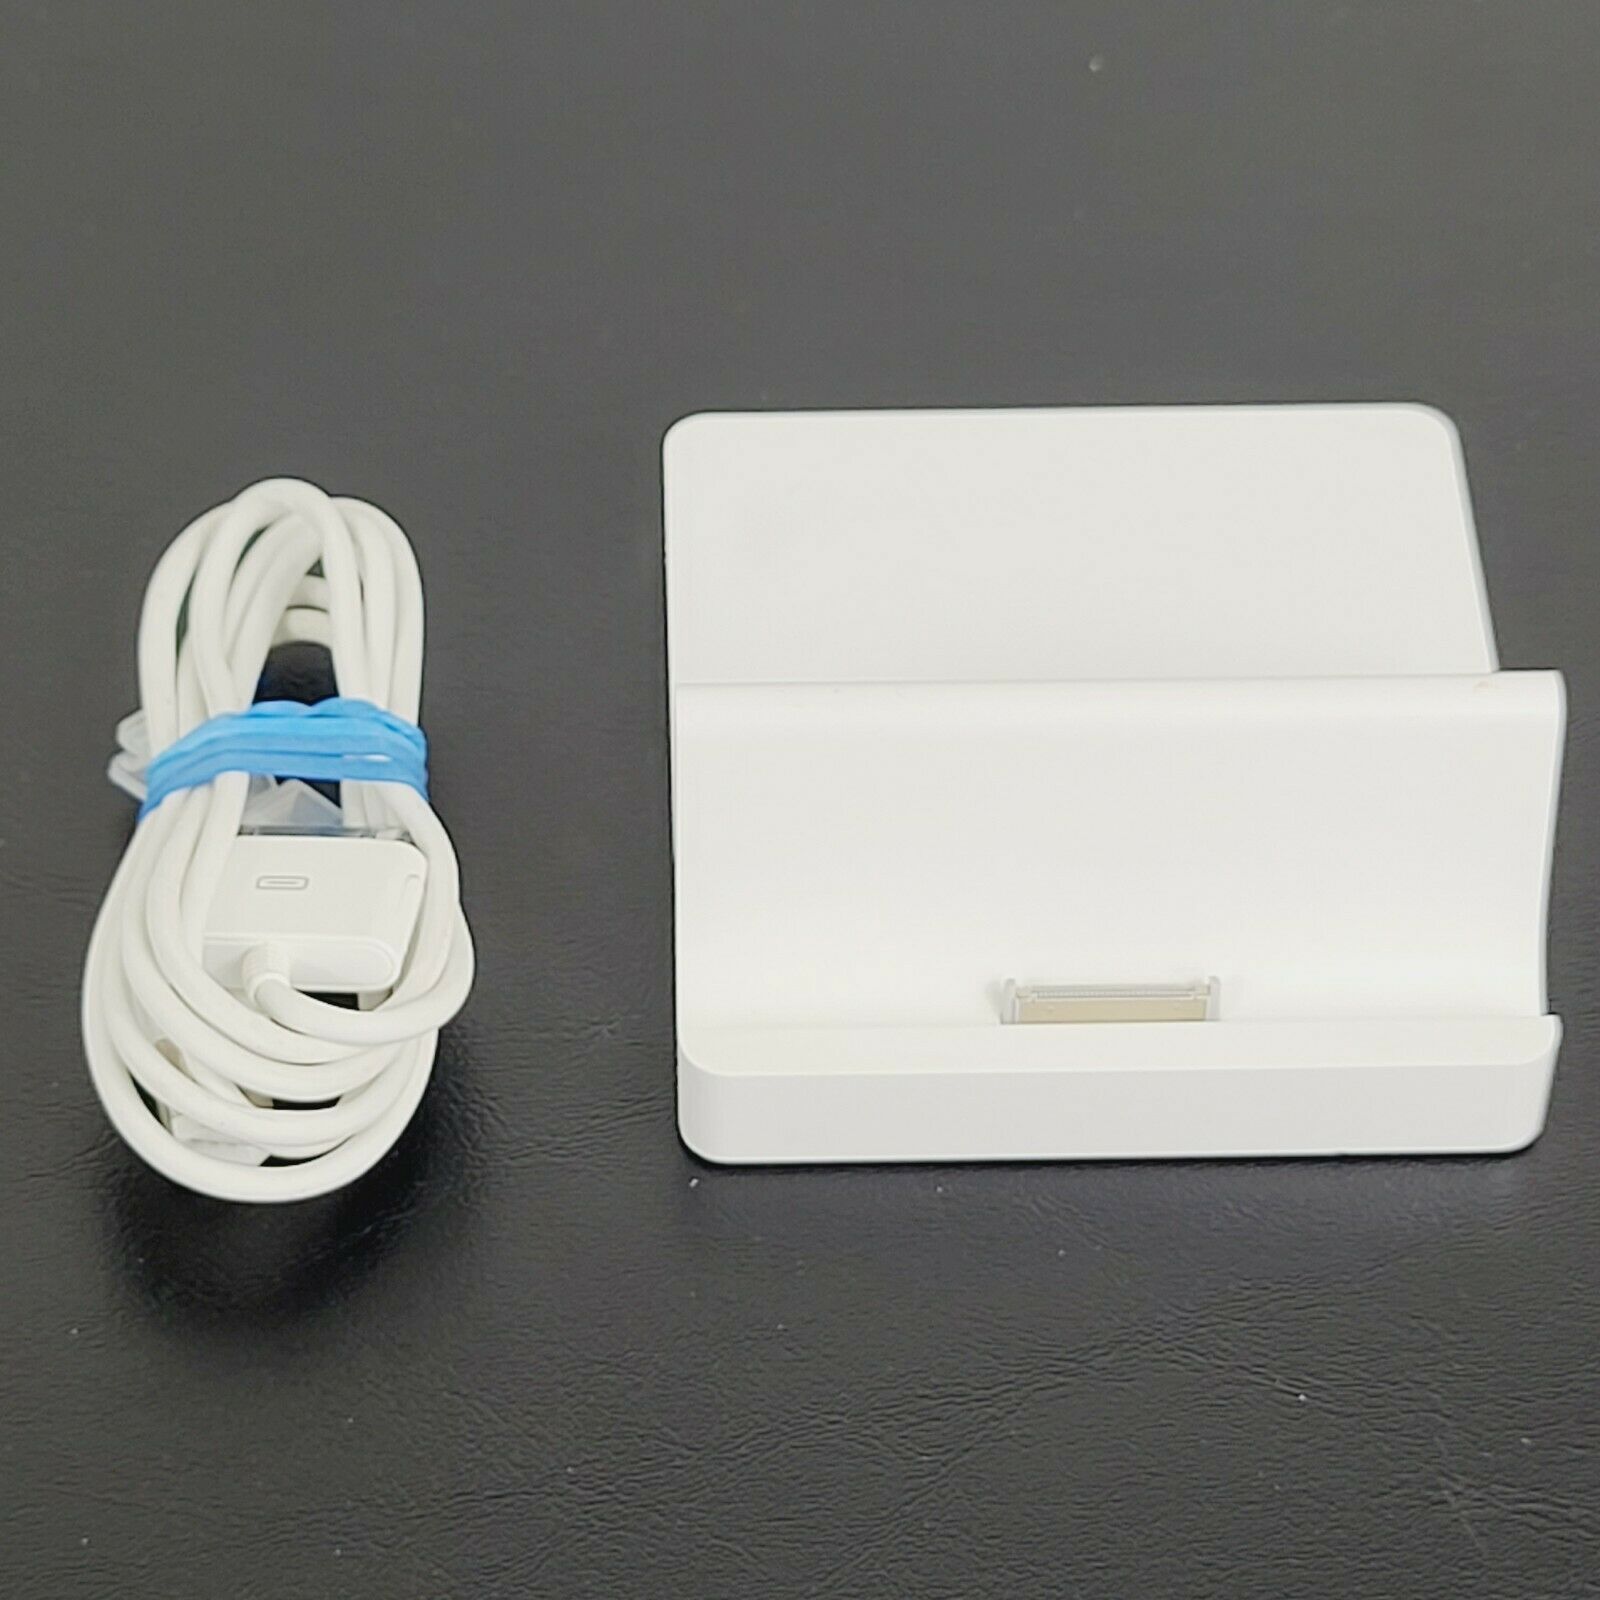 Genuine Apple A1381 Ipad Dock Charger Base & Cable For Ipad 2 & 3rd Generations